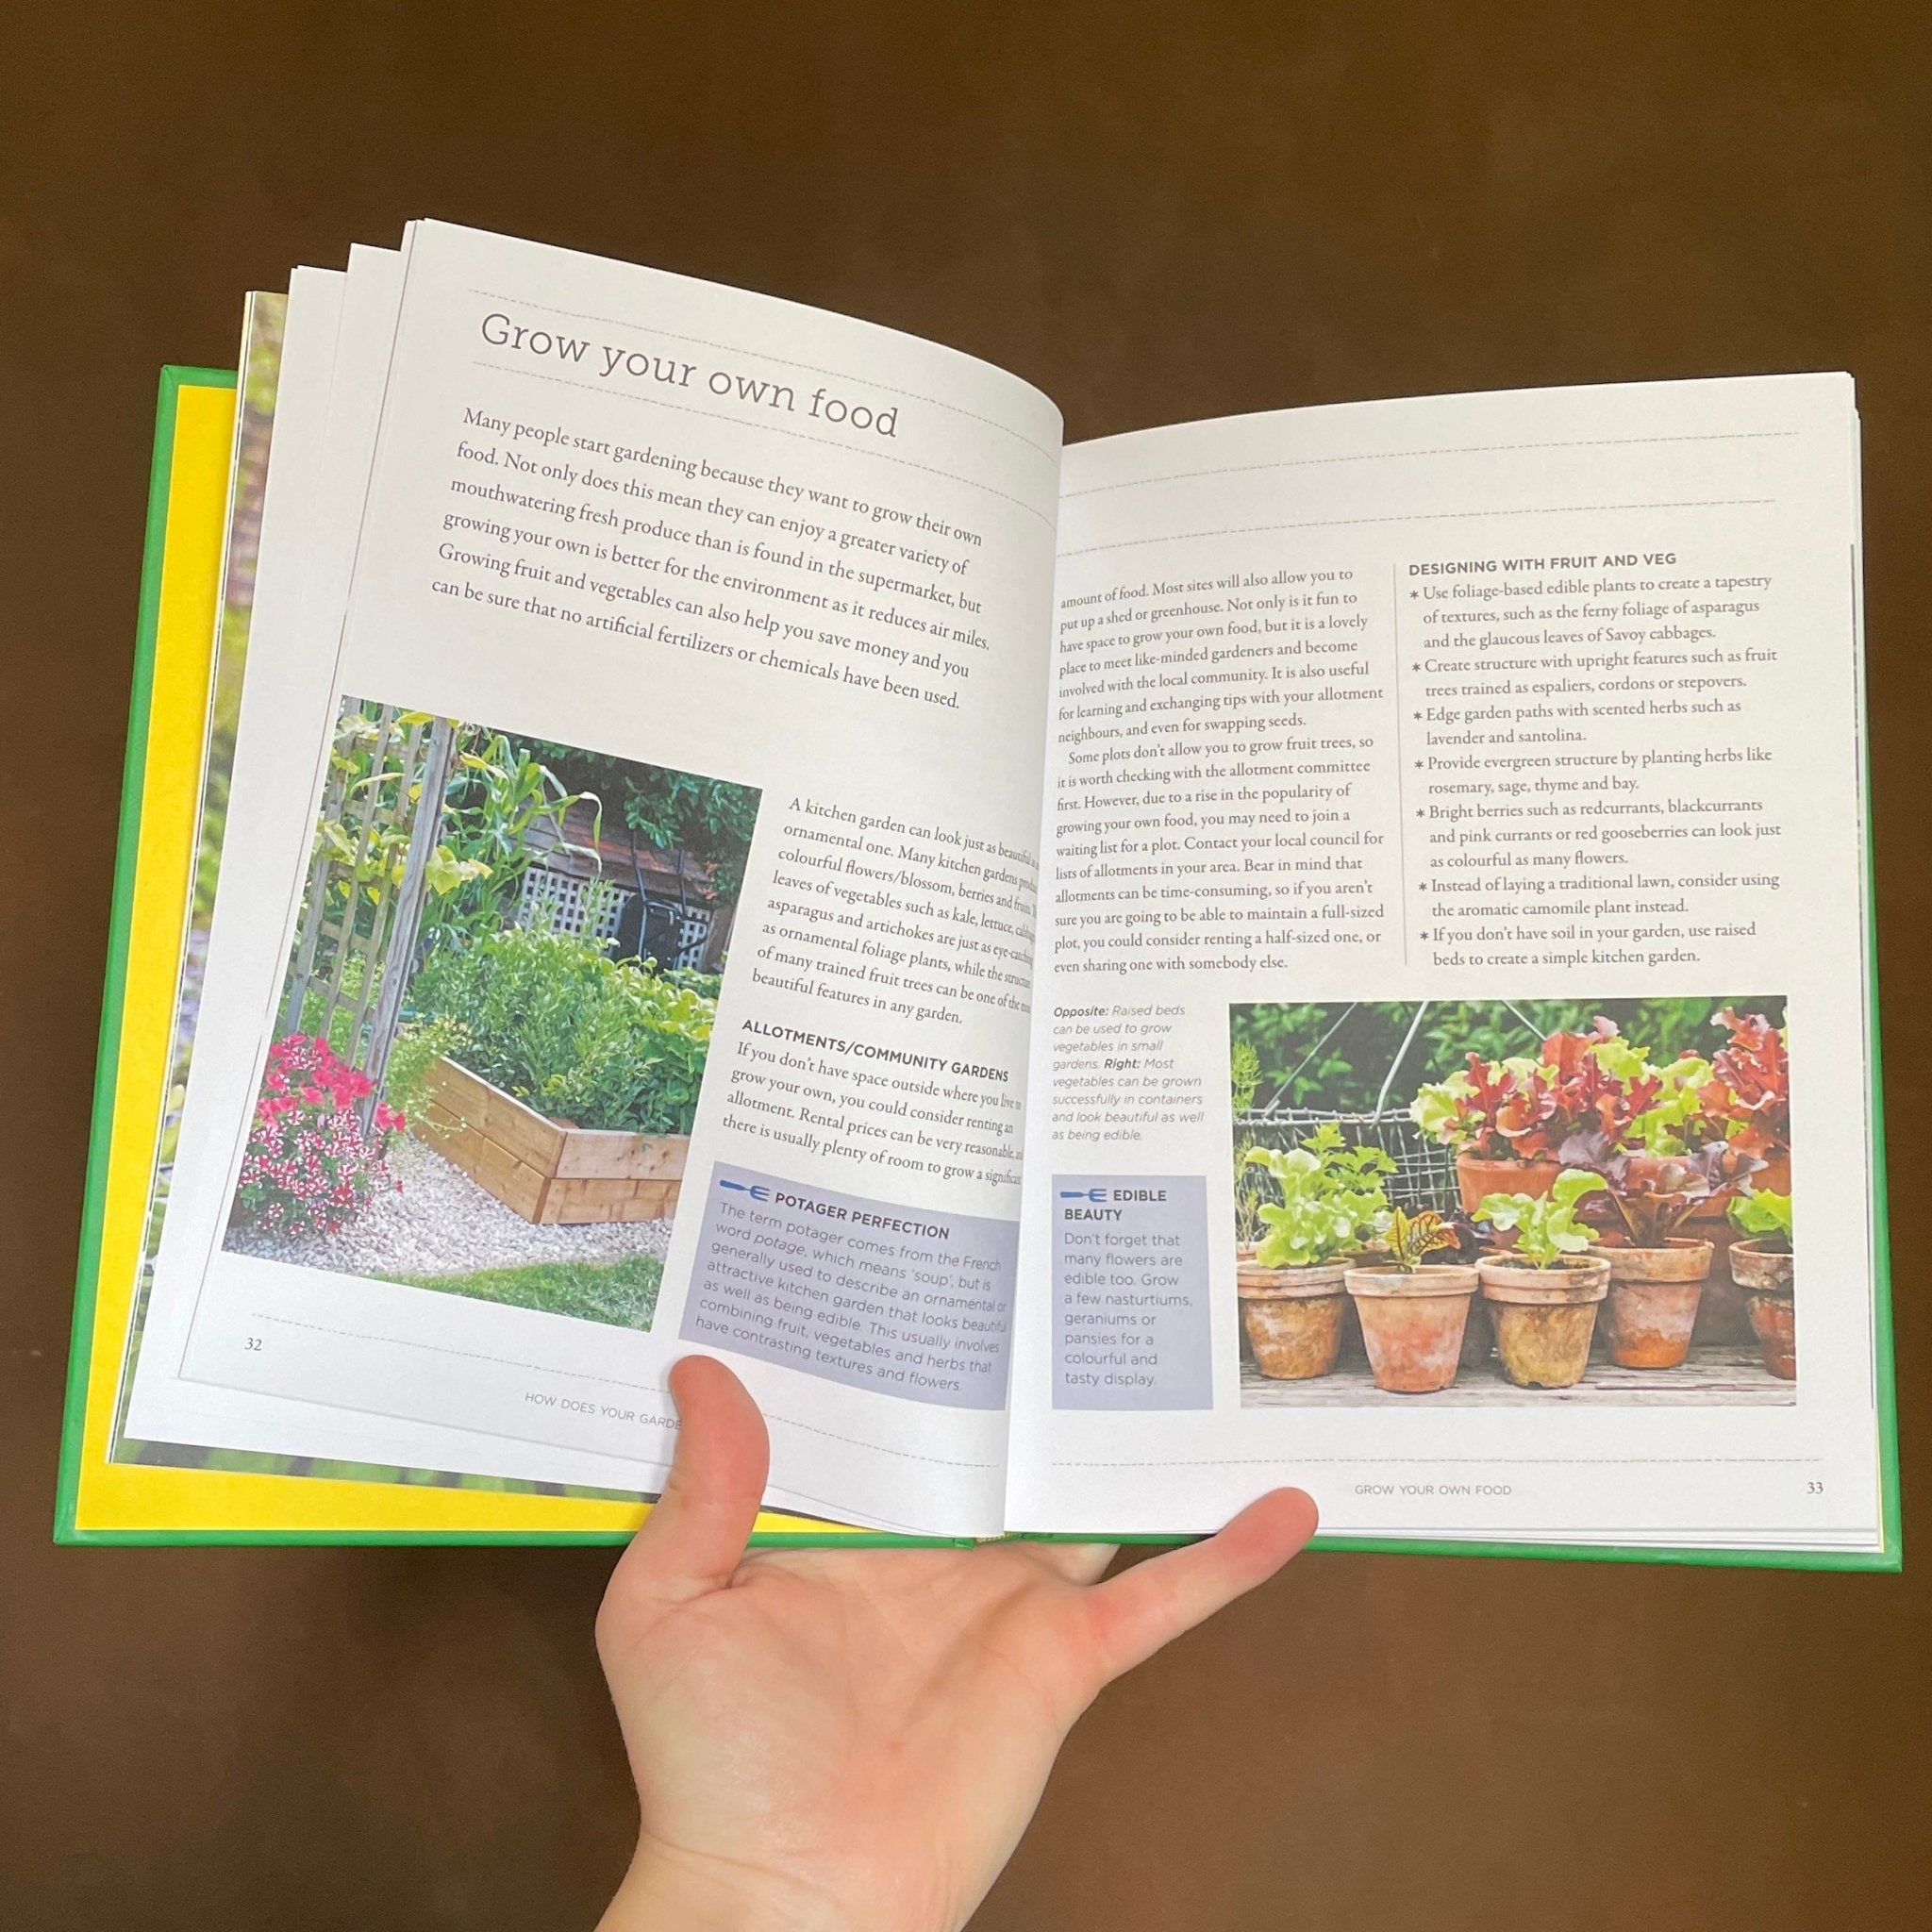 RHS - You Will Be Able to Garden By the End of This Book - grow urban. UK